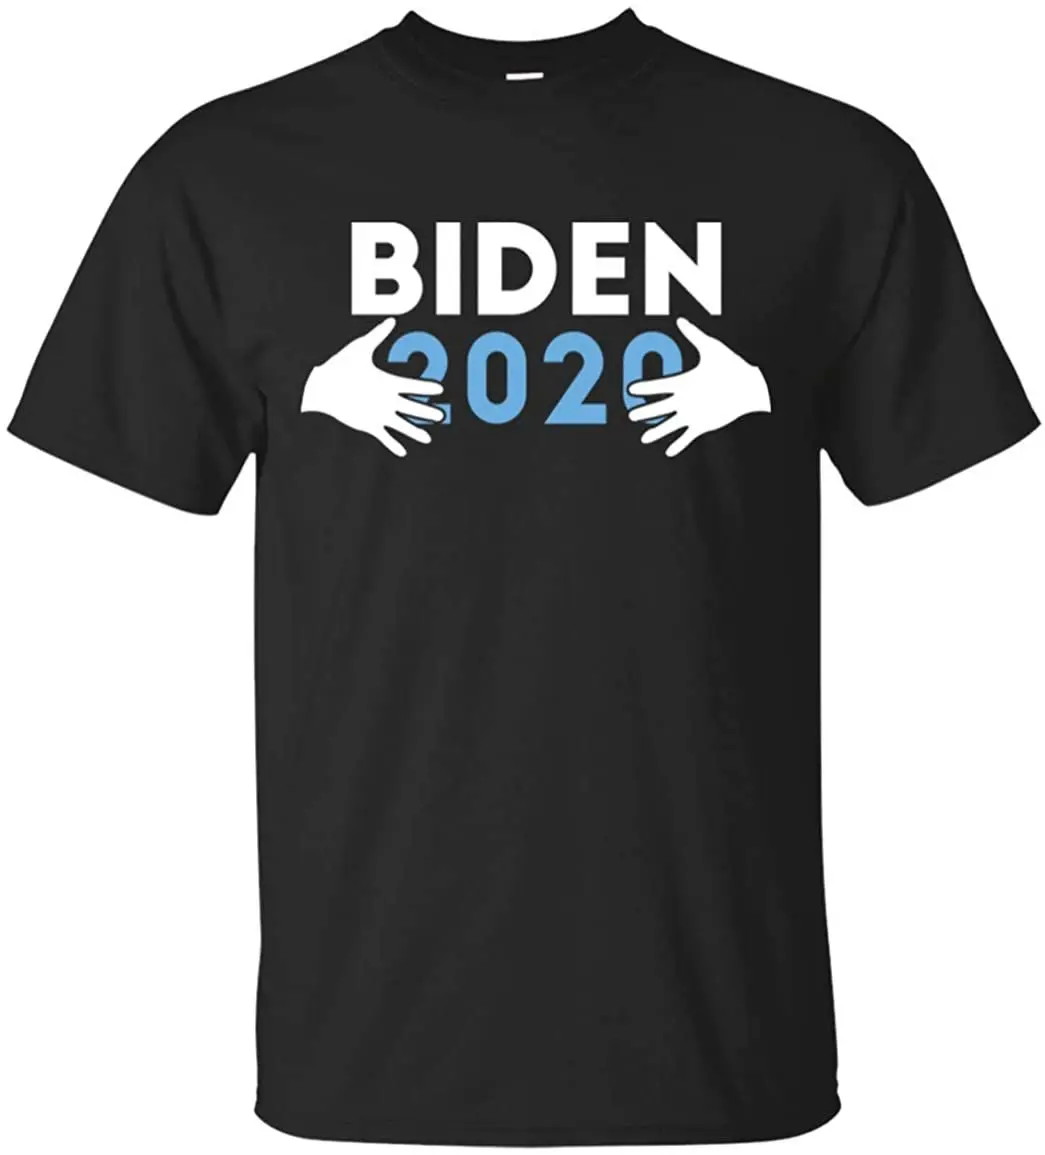 

Joe Biden 2020 Hands Funny Political Tshirt Gifts For Mens Breathable T Shirts New Summer Print T-shirt Pure Cotton Cool Tees